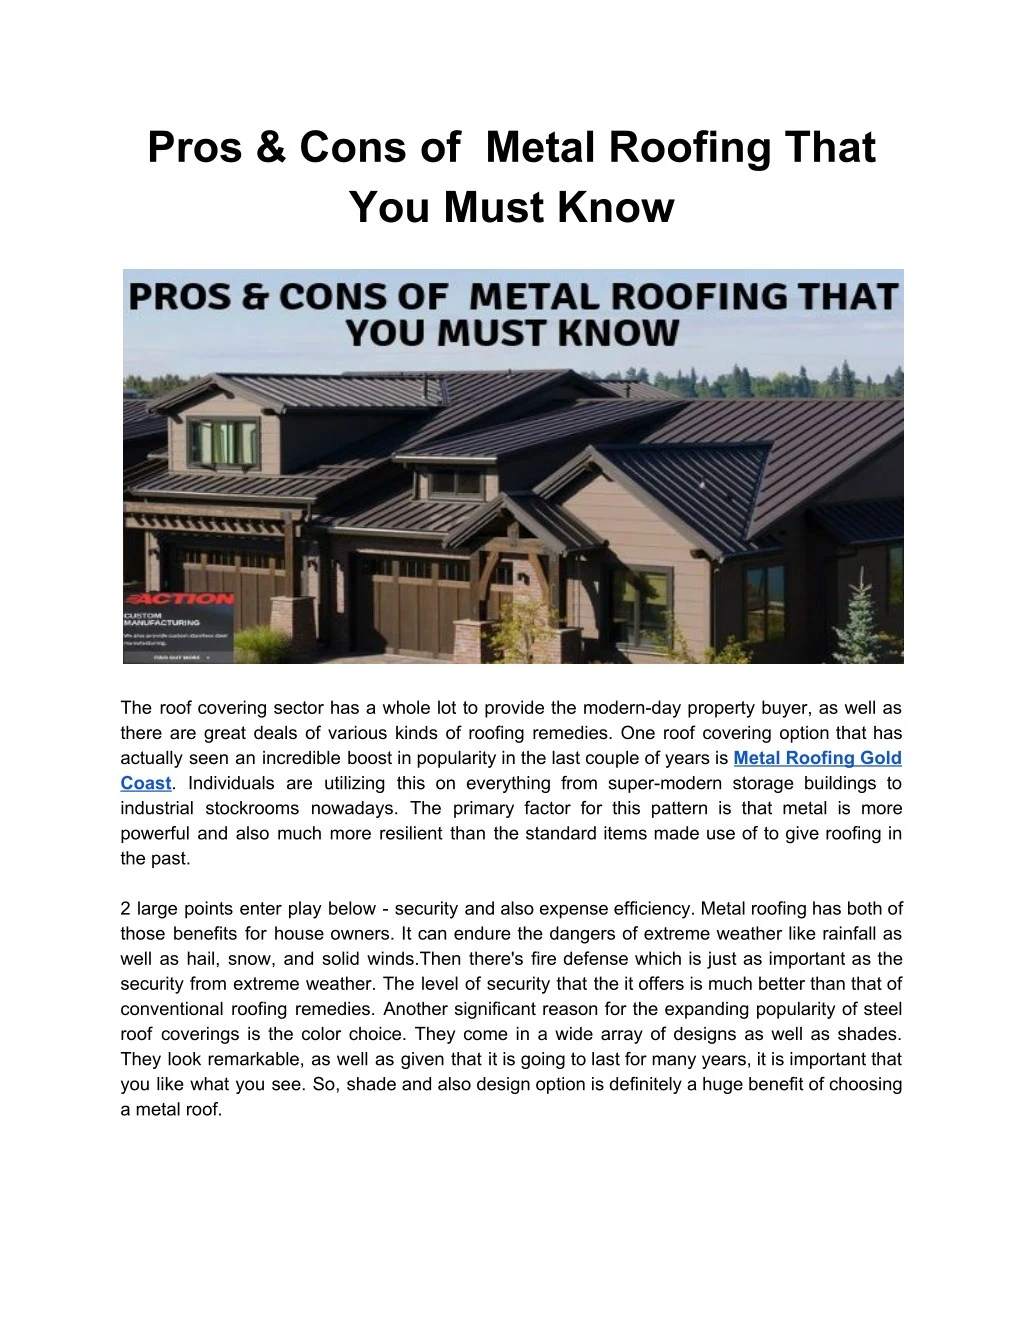 pros cons of metal roofing that you must know